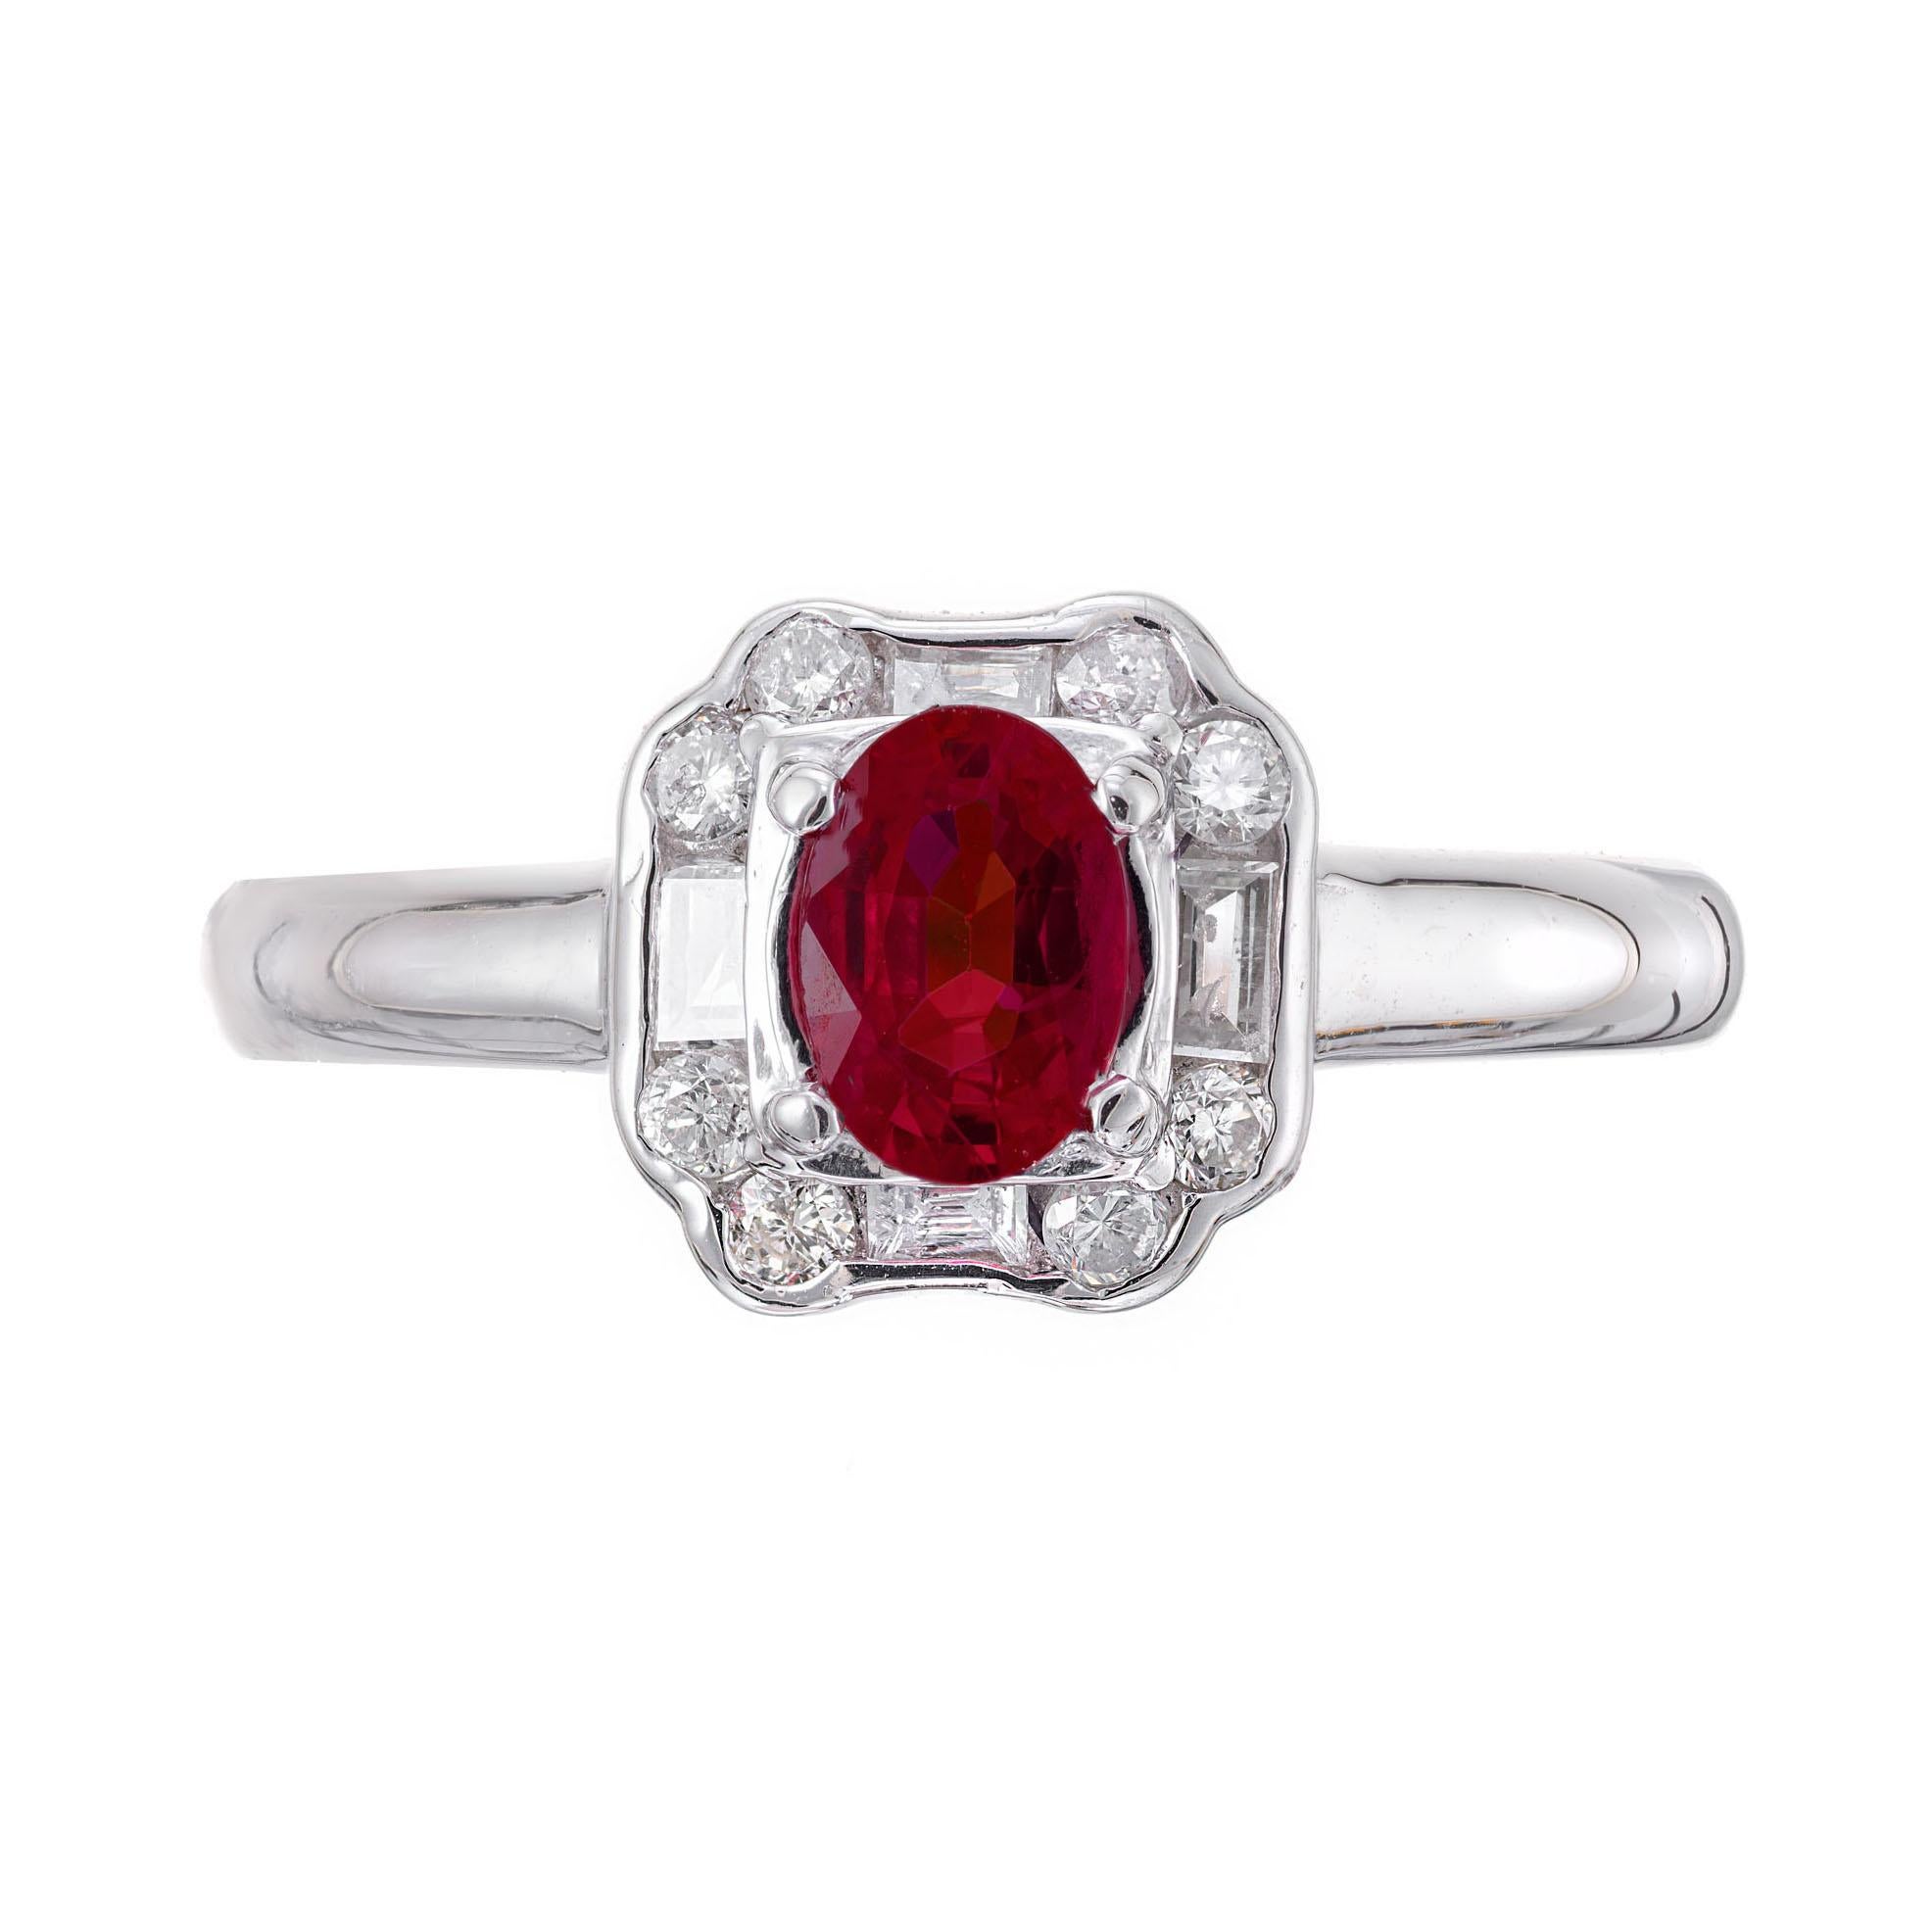 Art deco ruby and diamond ring. Oval center ruby with 8 round and 4 mele baguette cut diamonds in a handmade platinum setting. Circa 1930-1940.

1 oval ruby .64cts.
8 round diamonds approx. total weight .25cts
4 Baguette diamonds
Size 6.25 and